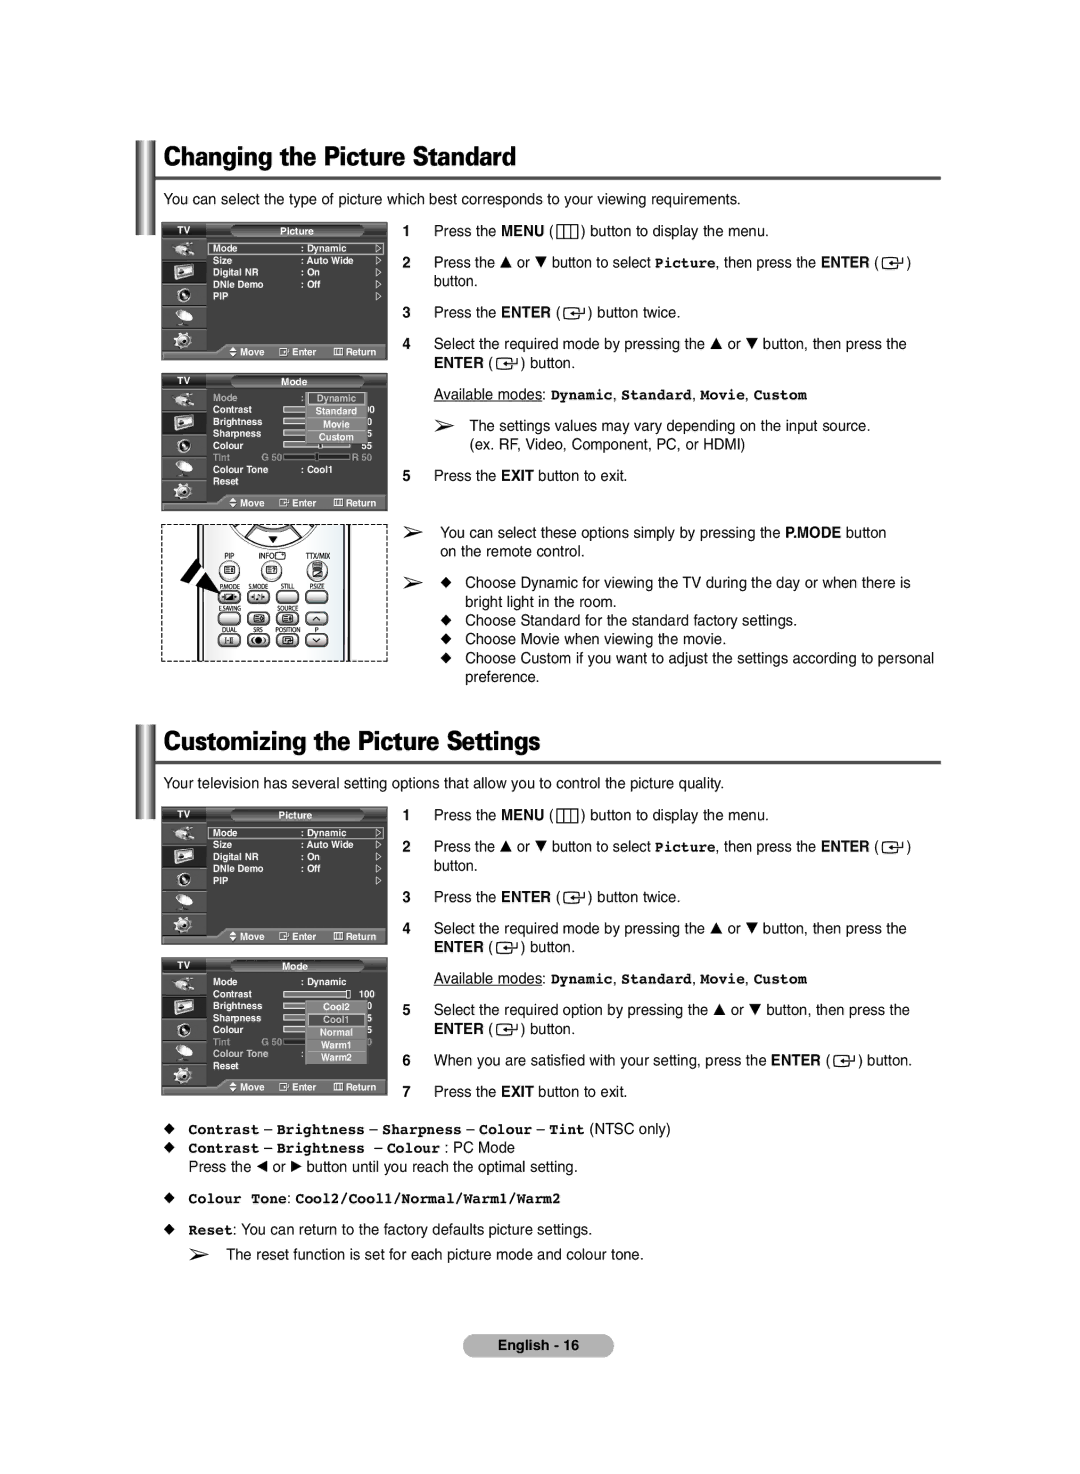 Samsung PS-42E7S, PS-42E7H manual Changing the Picture Standard, Customizing the Picture Settings 